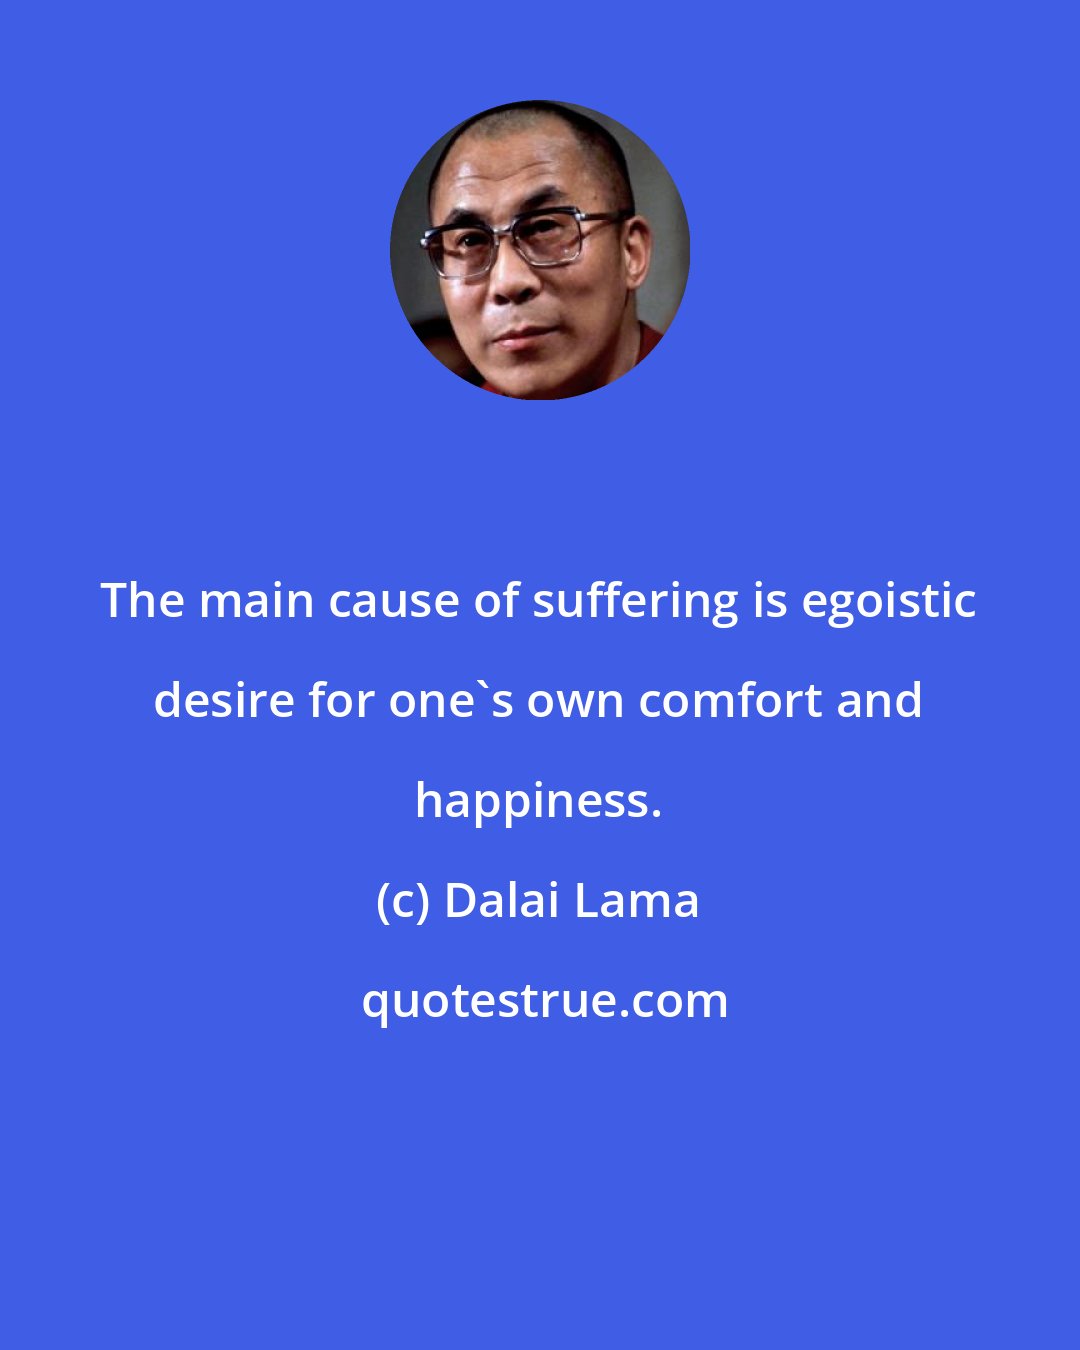 Dalai Lama: The main cause of suffering is egoistic desire for one's own comfort and happiness.